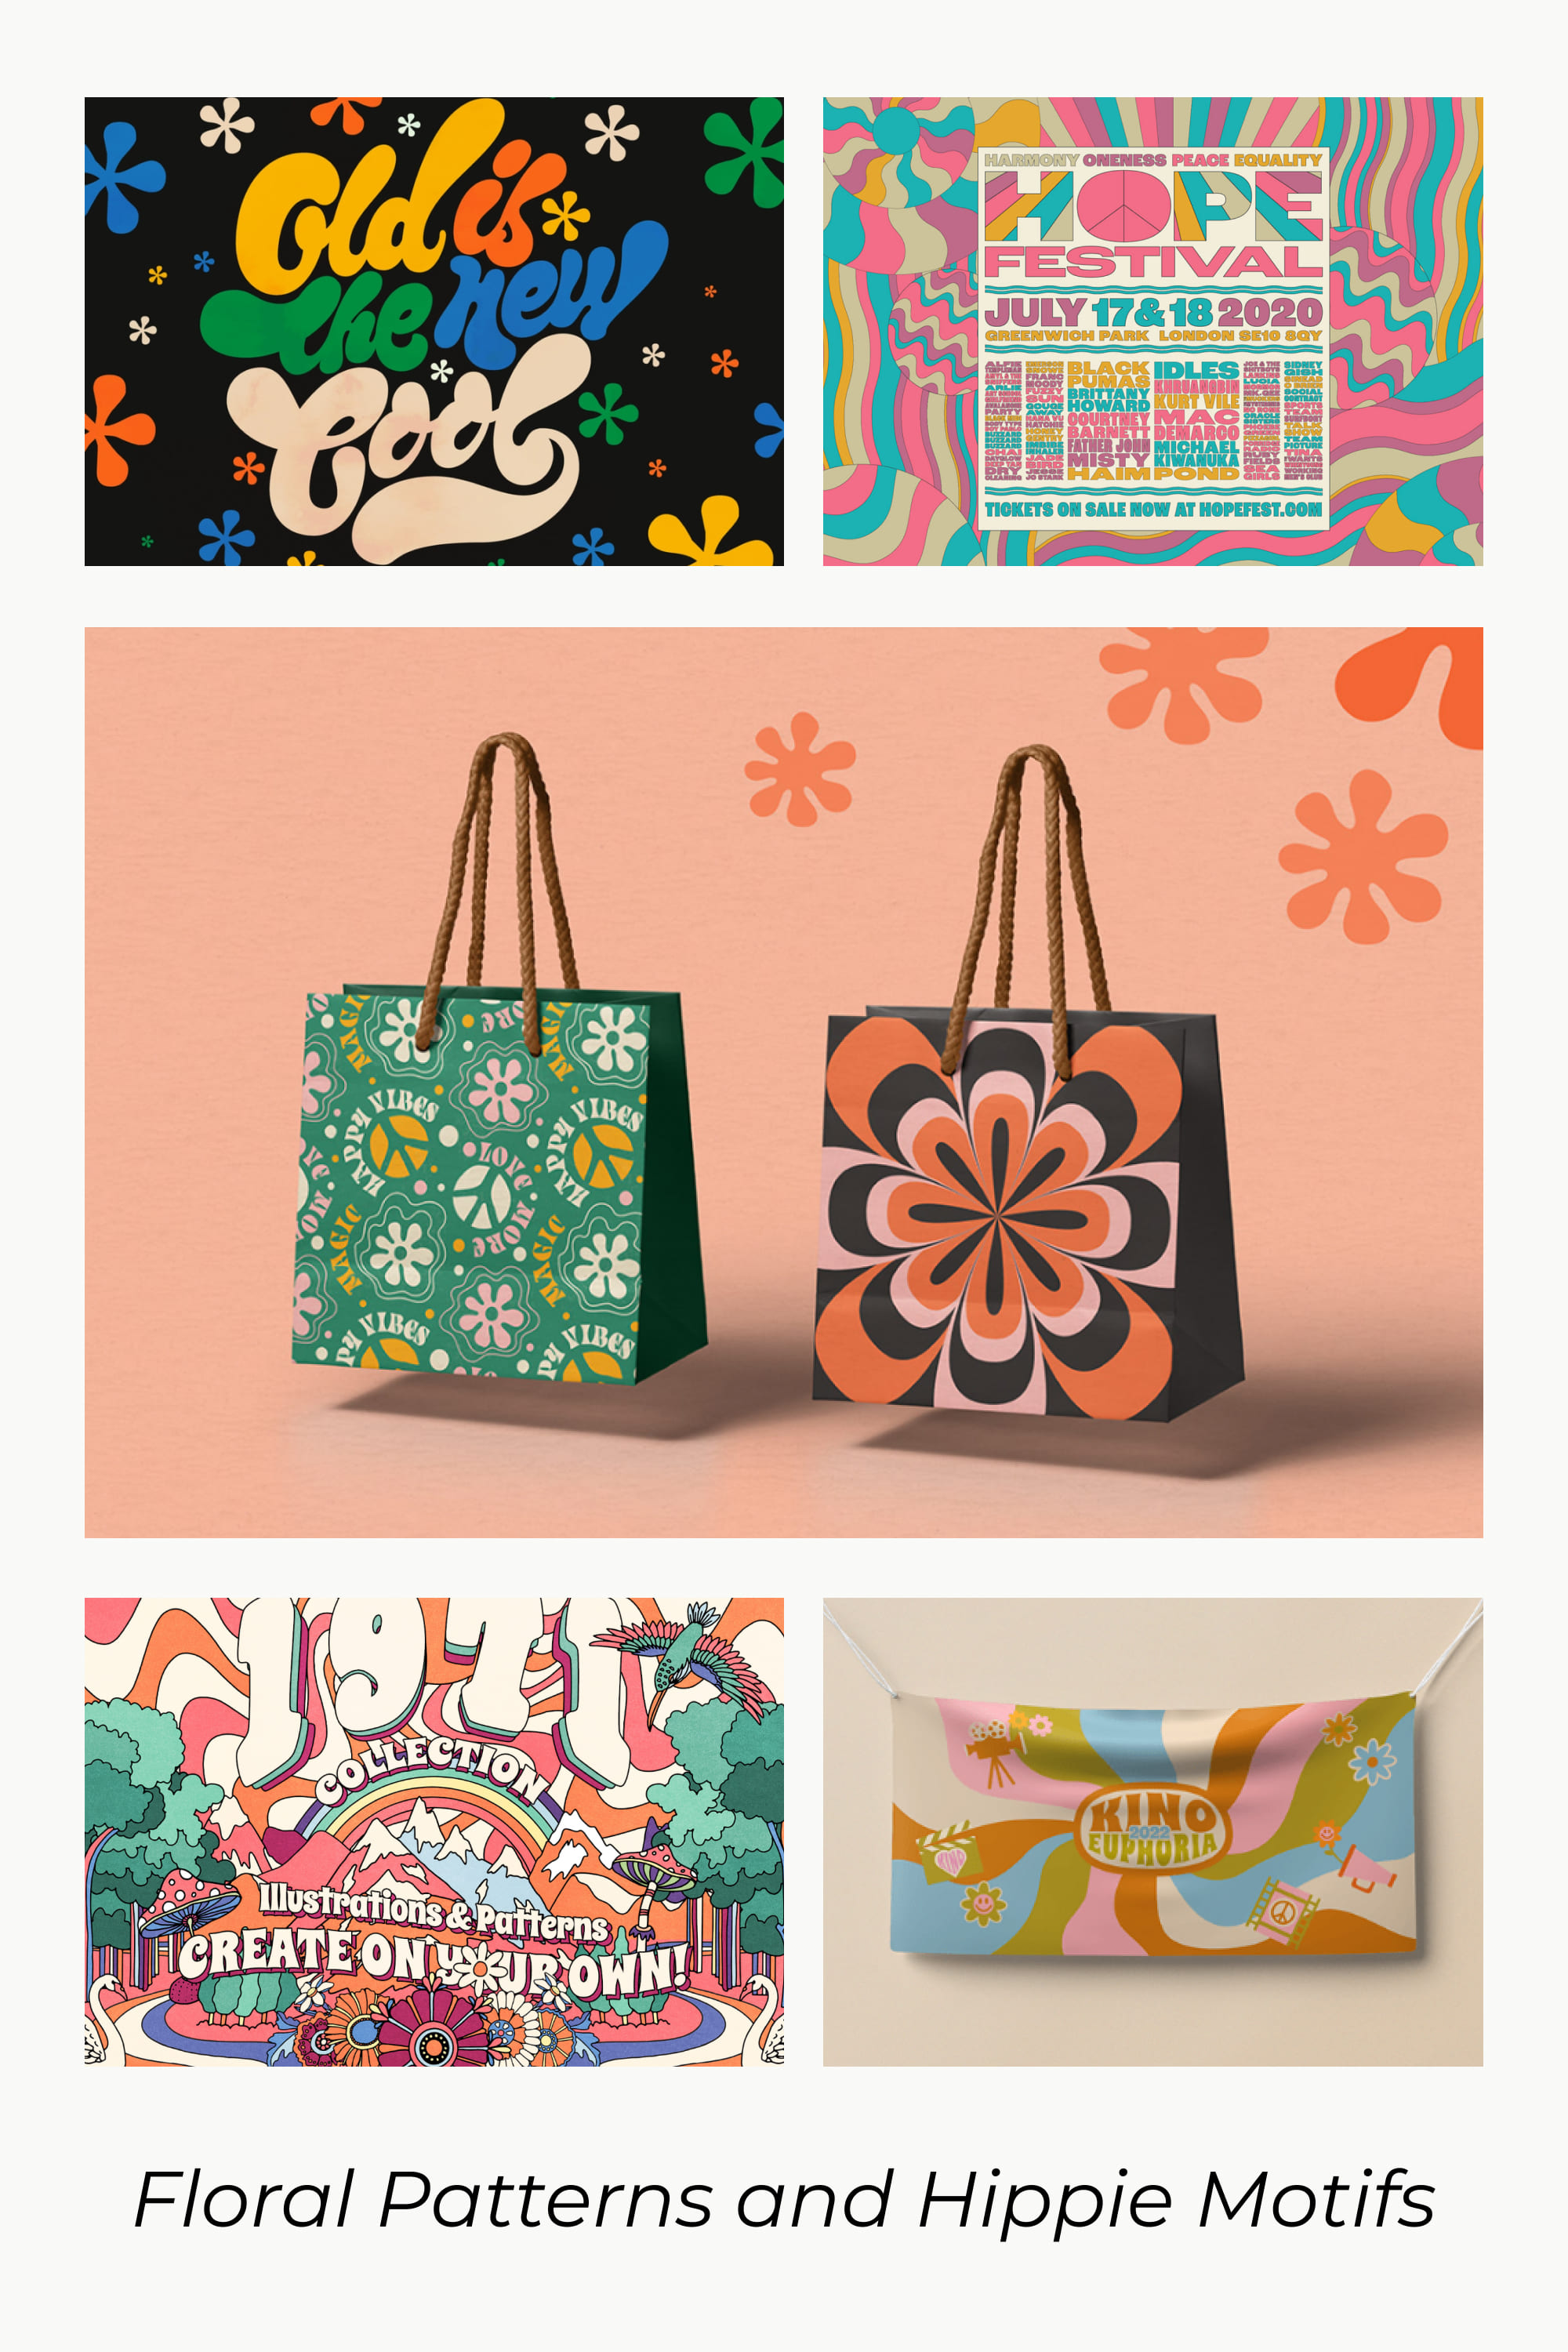 Floral and hippie patterns on bags.